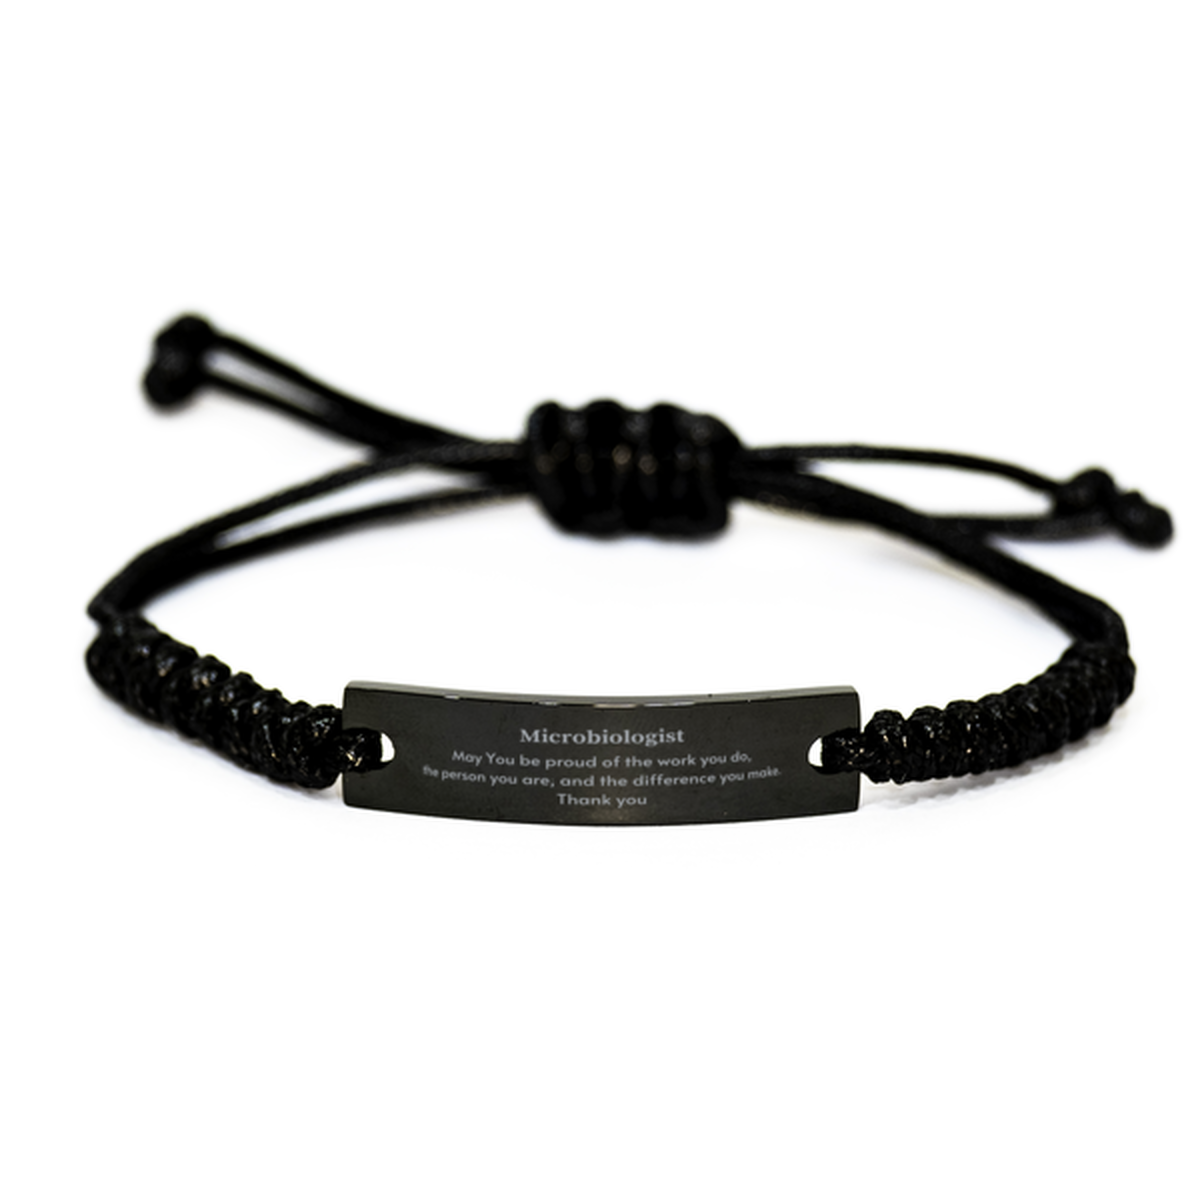 Heartwarming Black Rope Bracelet Retirement Coworkers Gifts for Microbiologist, Microbiologist May You be proud of the work you do, the person you are Gifts for Boss Men Women Friends